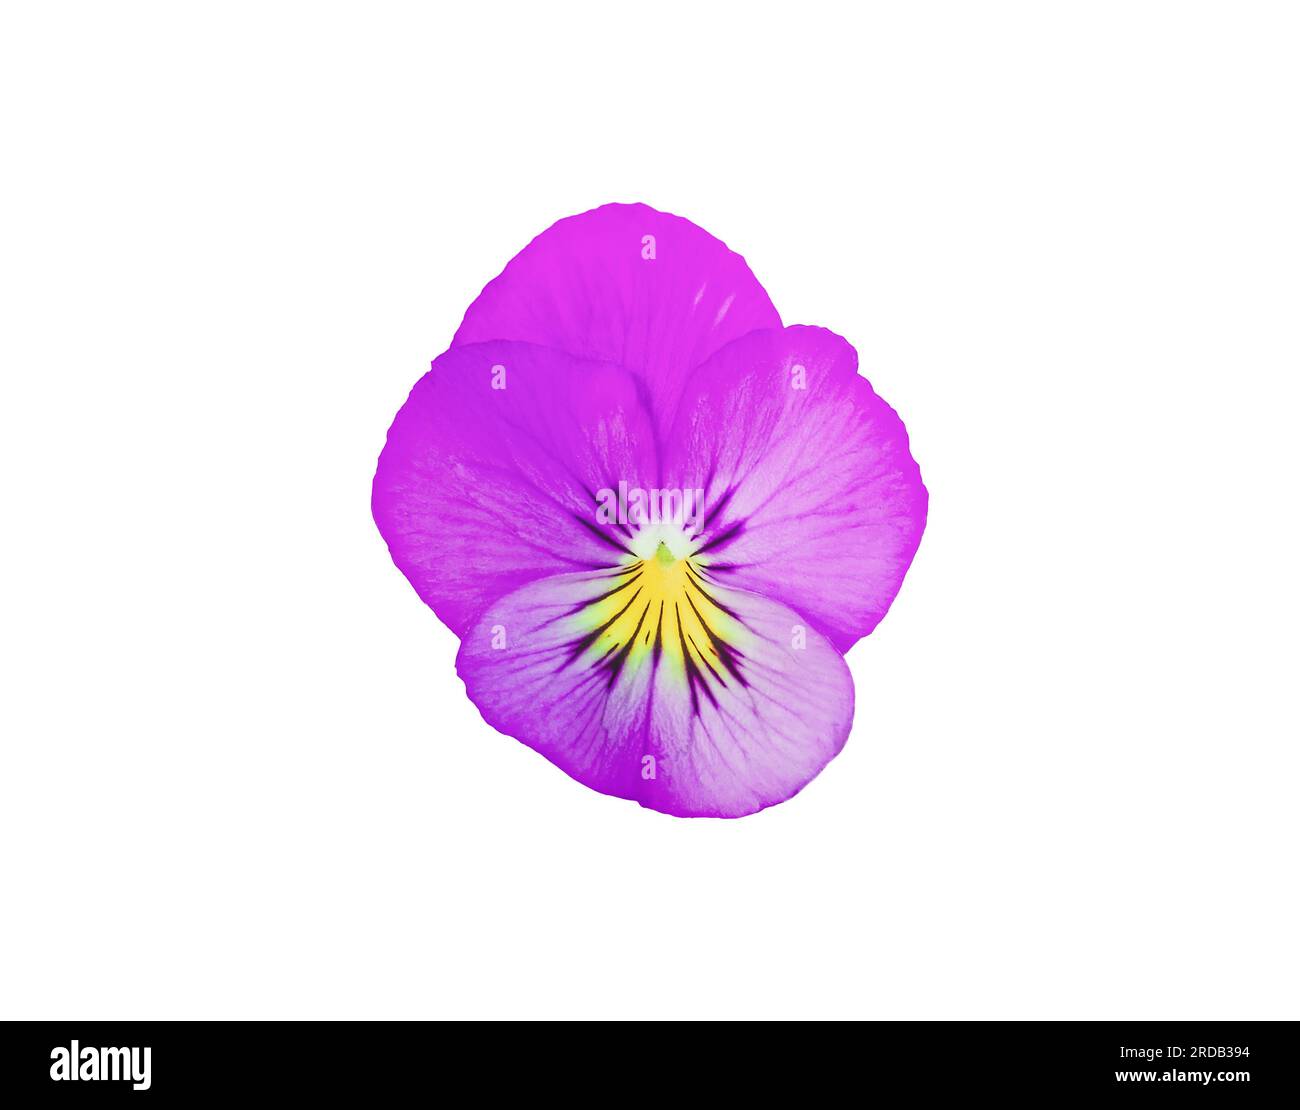 Purple pansy isolated on white background closeup. Violet pansies flower garden icon. Blooming Viola wirttrockiana plant cut out. Close up lilac Viola Stock Photo